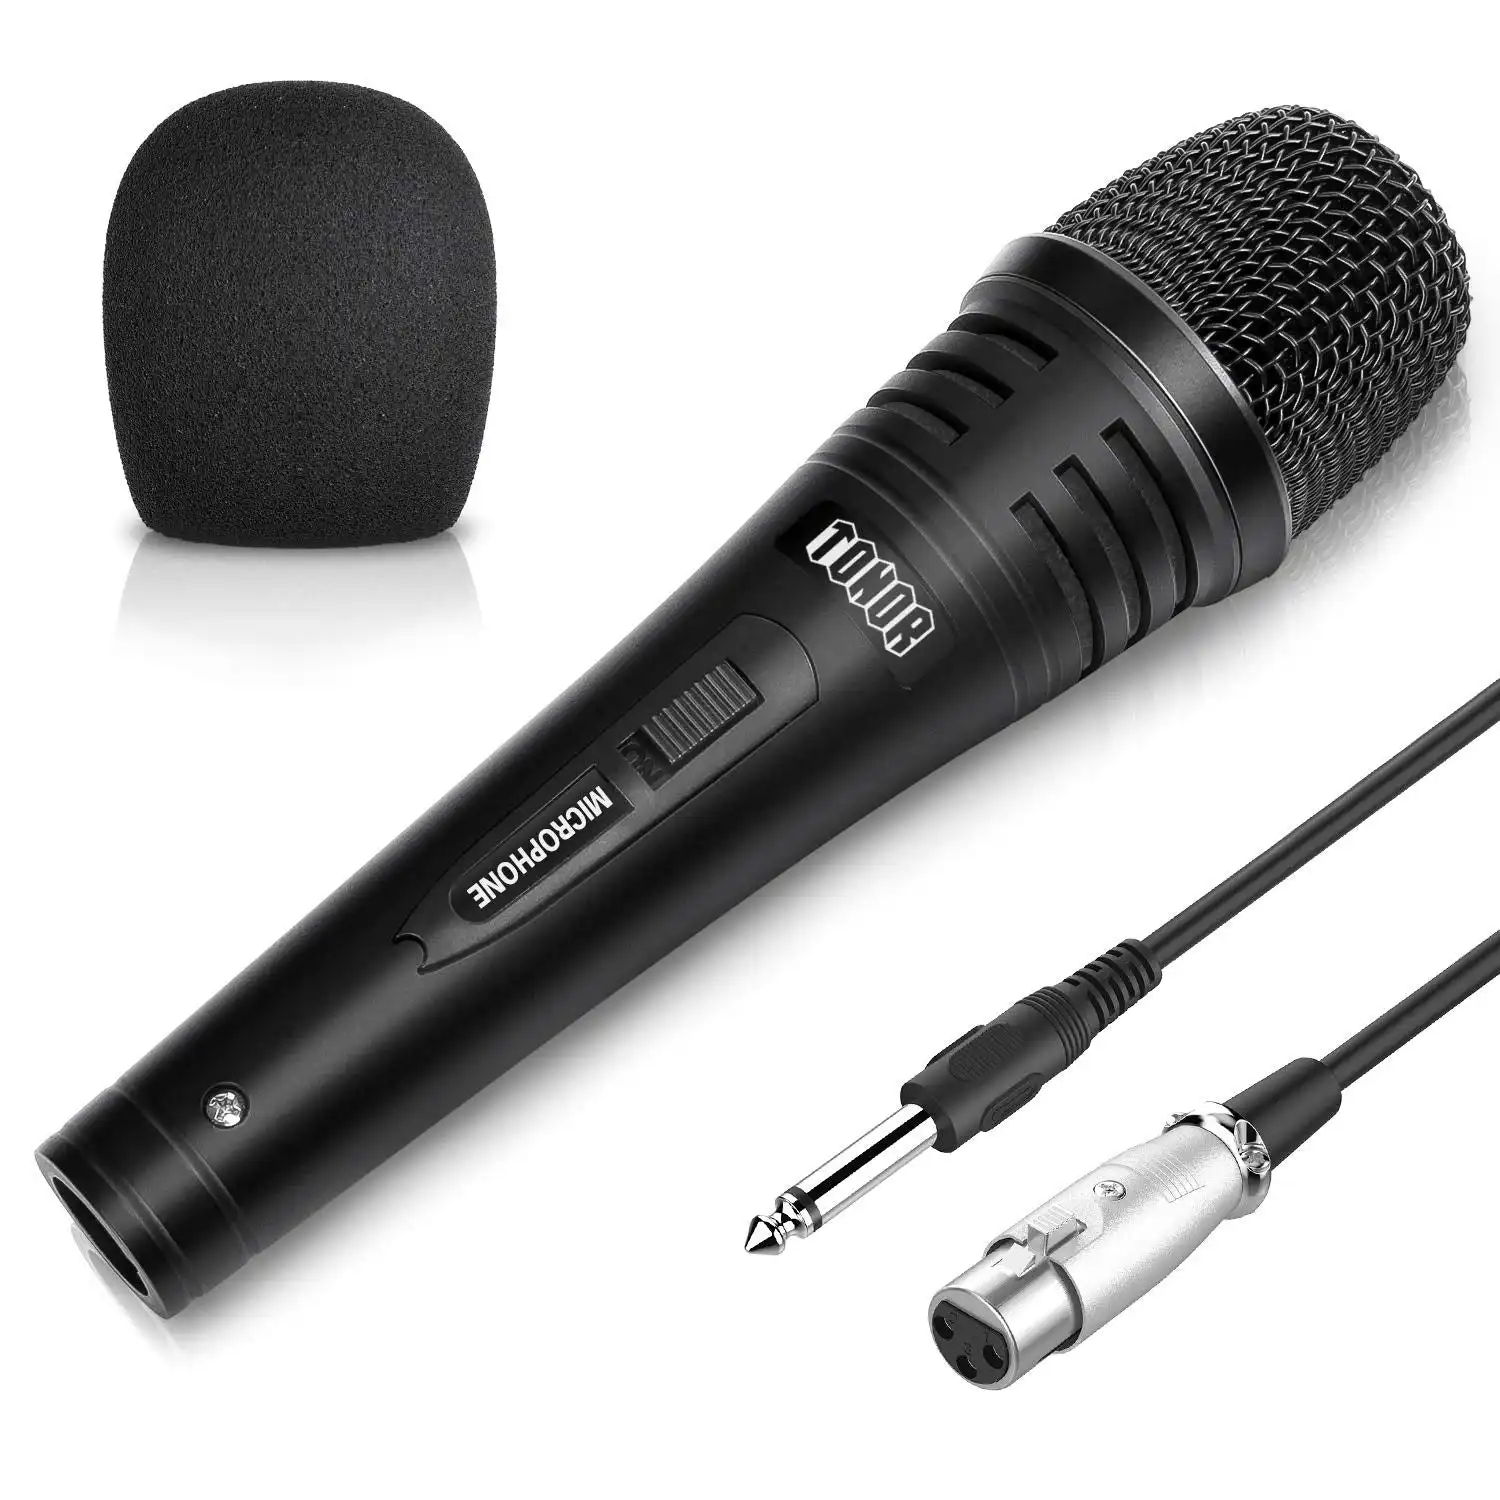 TONOR Dynamic Karaoke Microphone for Singing with 4.5m XLR Cable, Metal Handheld Mic Compatible with Karaoke Machine/Speaker/Amp/Mixer for Karaoke Sin